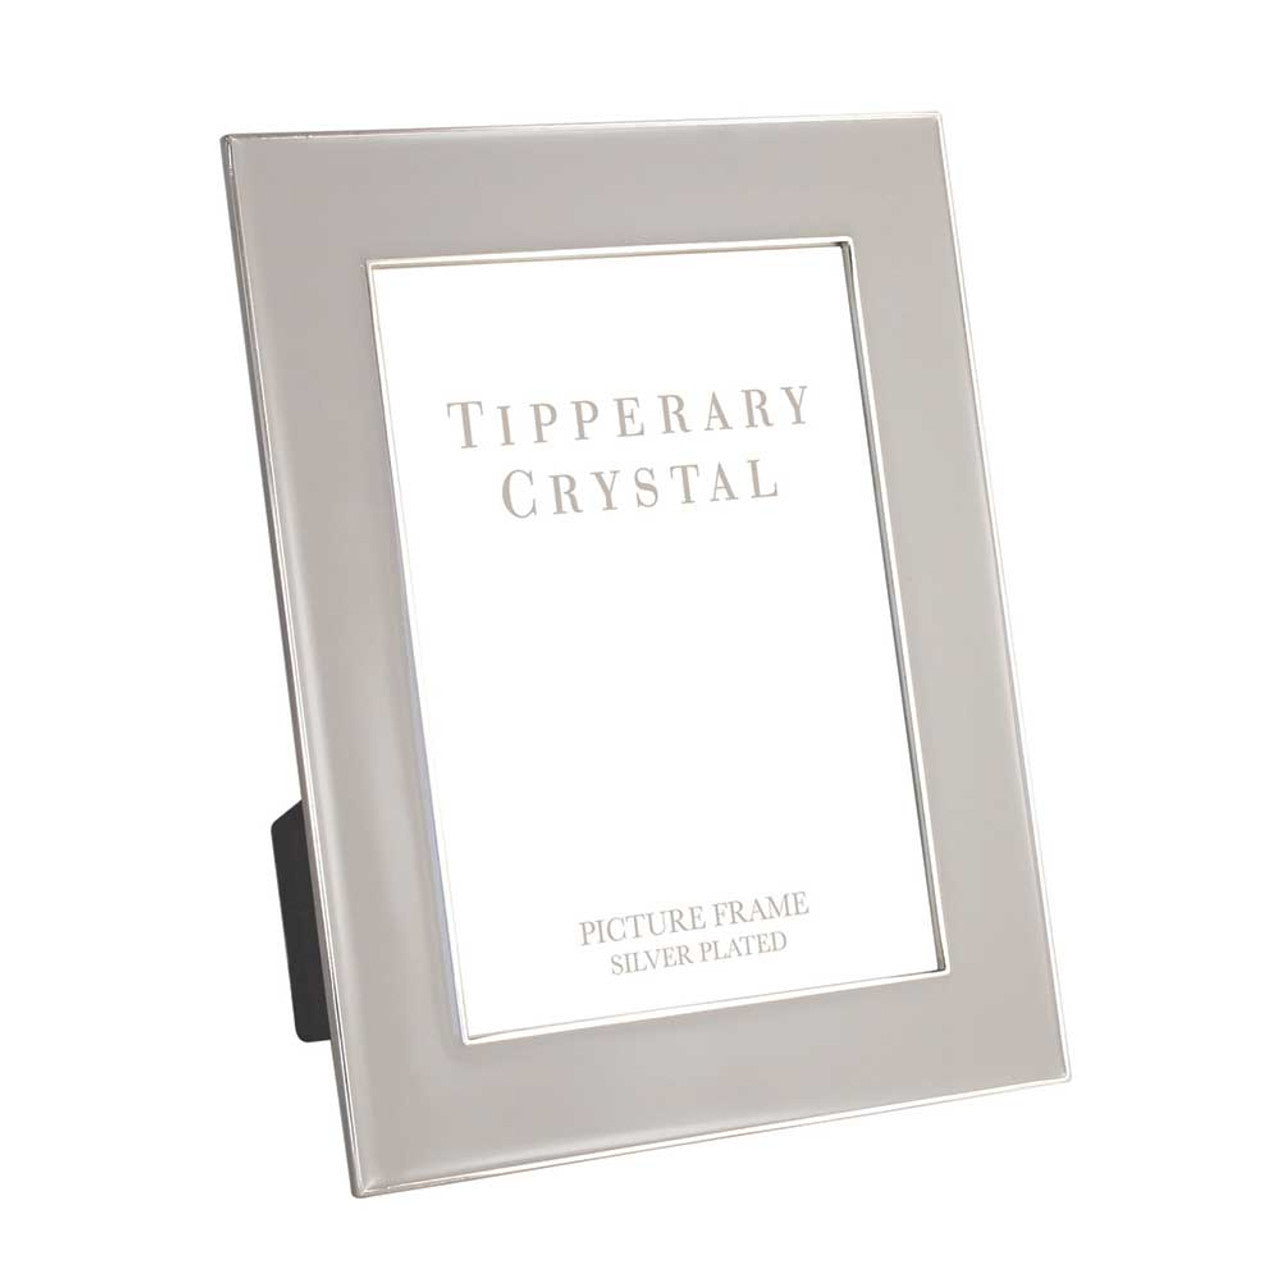 Tipperary Crystal Celebrations 5 x 7  Frame